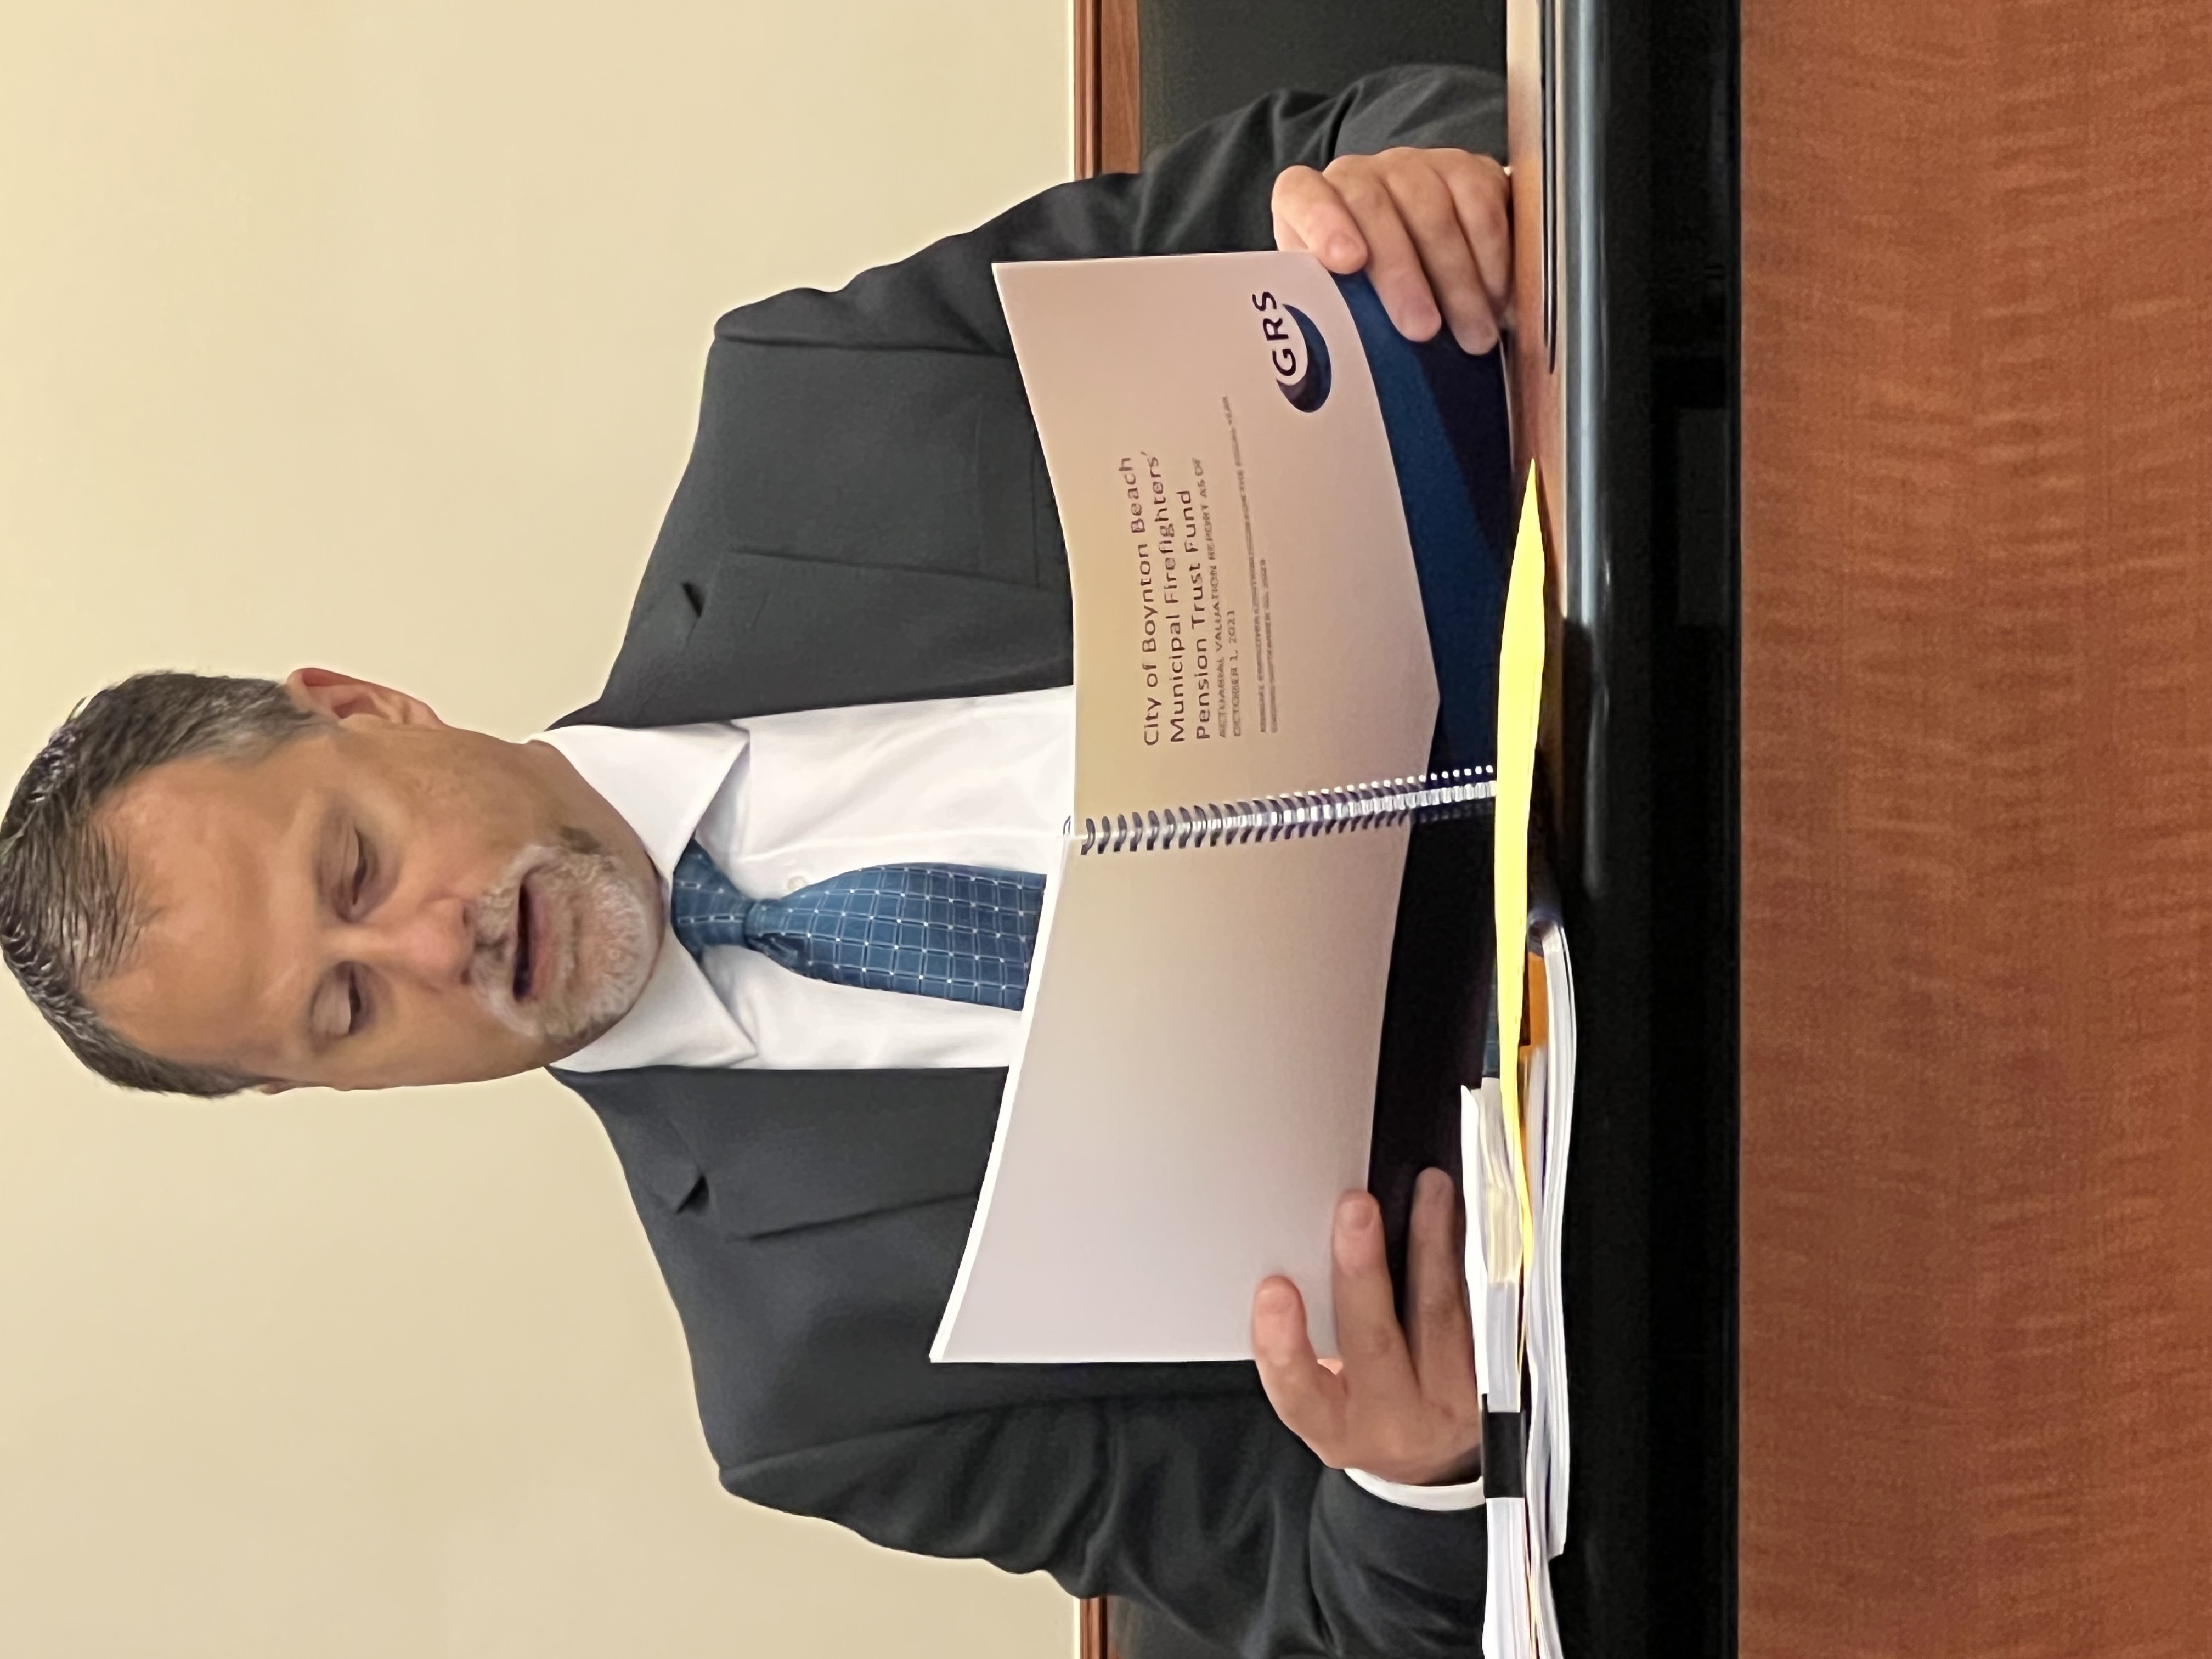 Mr. Pete Strong - Board Actuary, GRS Consulting presented the Actuarial Valuation Report as of October 1, 2021. This report determines the employer's contribution for the fiscal year ending September 30, 2023. Kindly follow this link to review the report: <a href='http://bbffp.org/docs_state/ActuarialValuation/2021_BBFF_ValuationReport.pdf' class='lnkSlider' target='_blank'>Actuarial Valuation Report</a>.